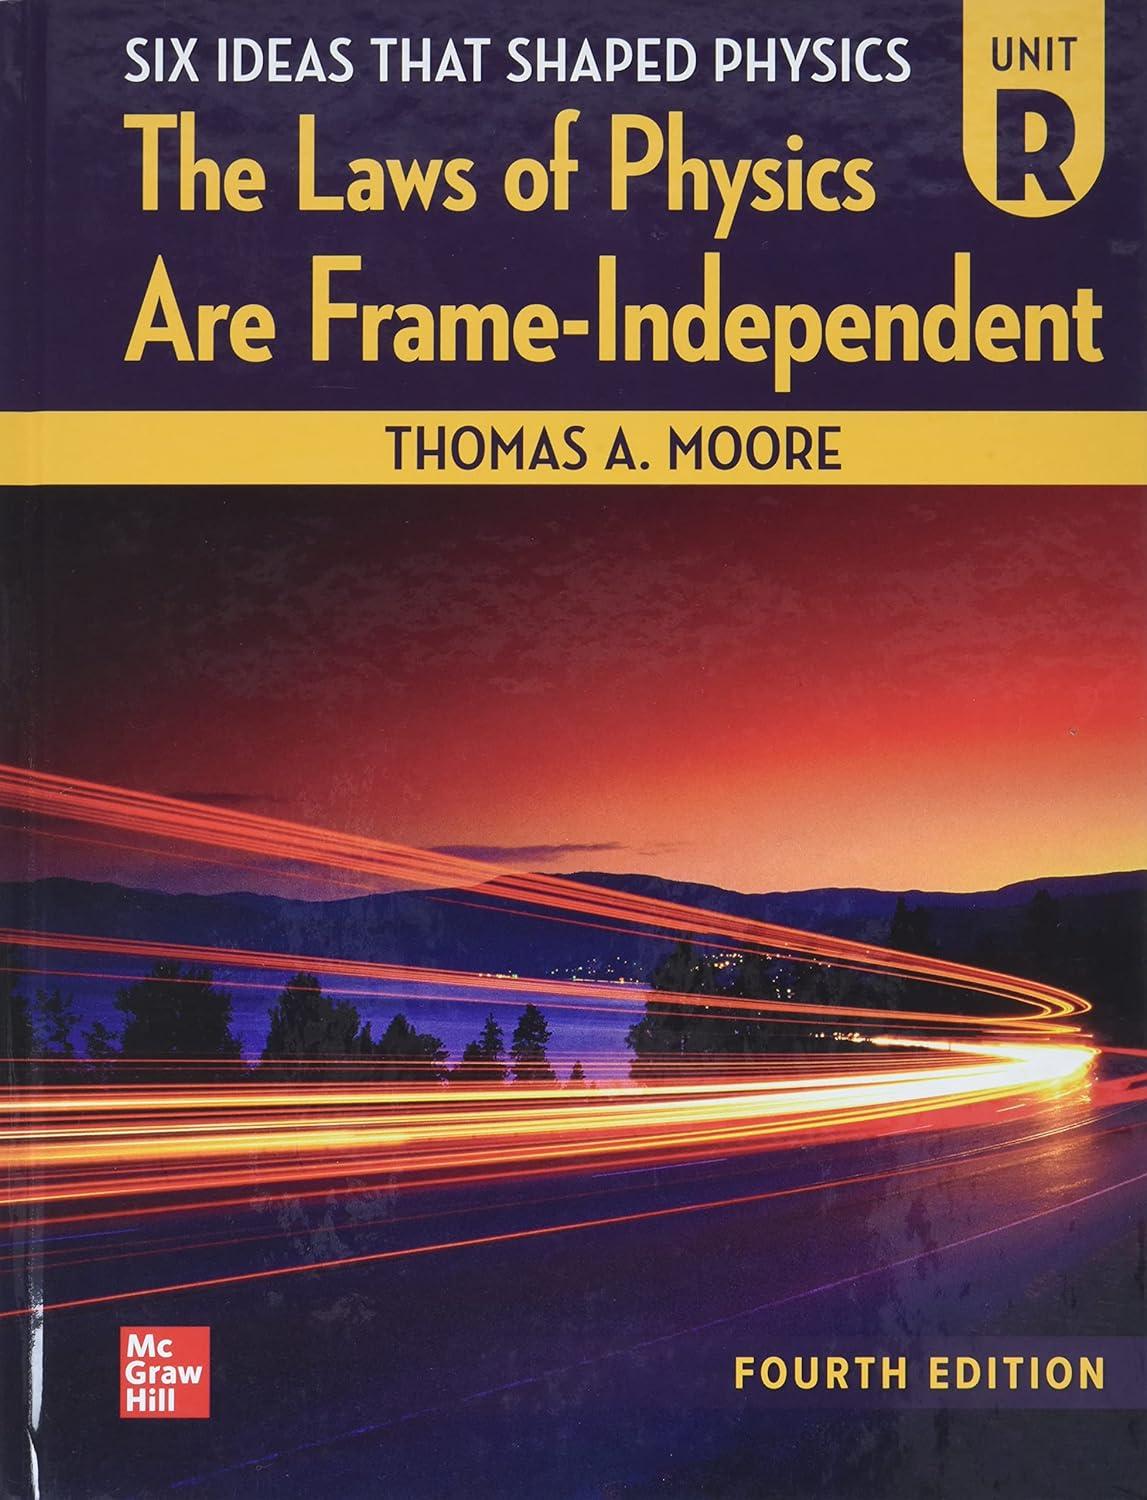 six ideas that shaped physics unit r laws of physics are frame independent 4th edition thomas moore